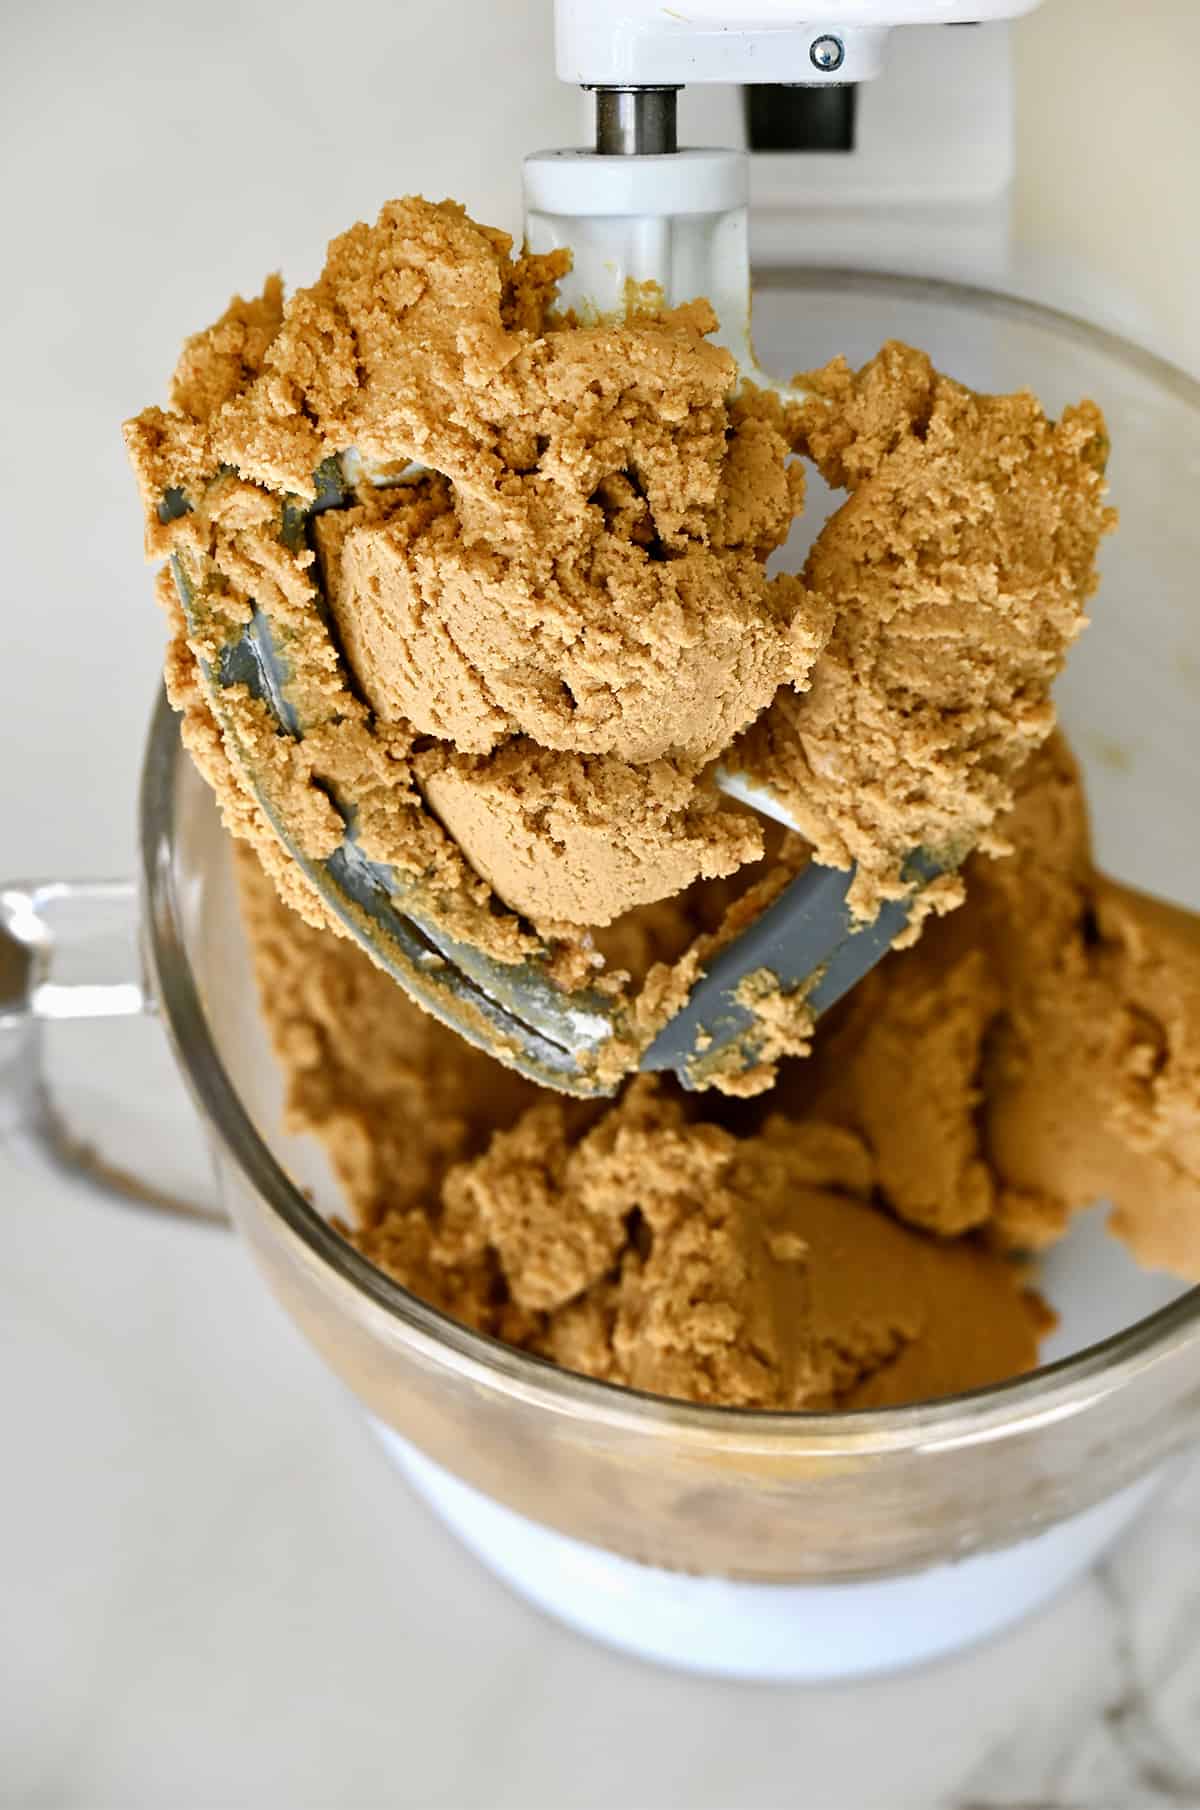 Ginger molasses cookie dough sits in the glass bowl of a stand mixer, ready to be shaped into balls.